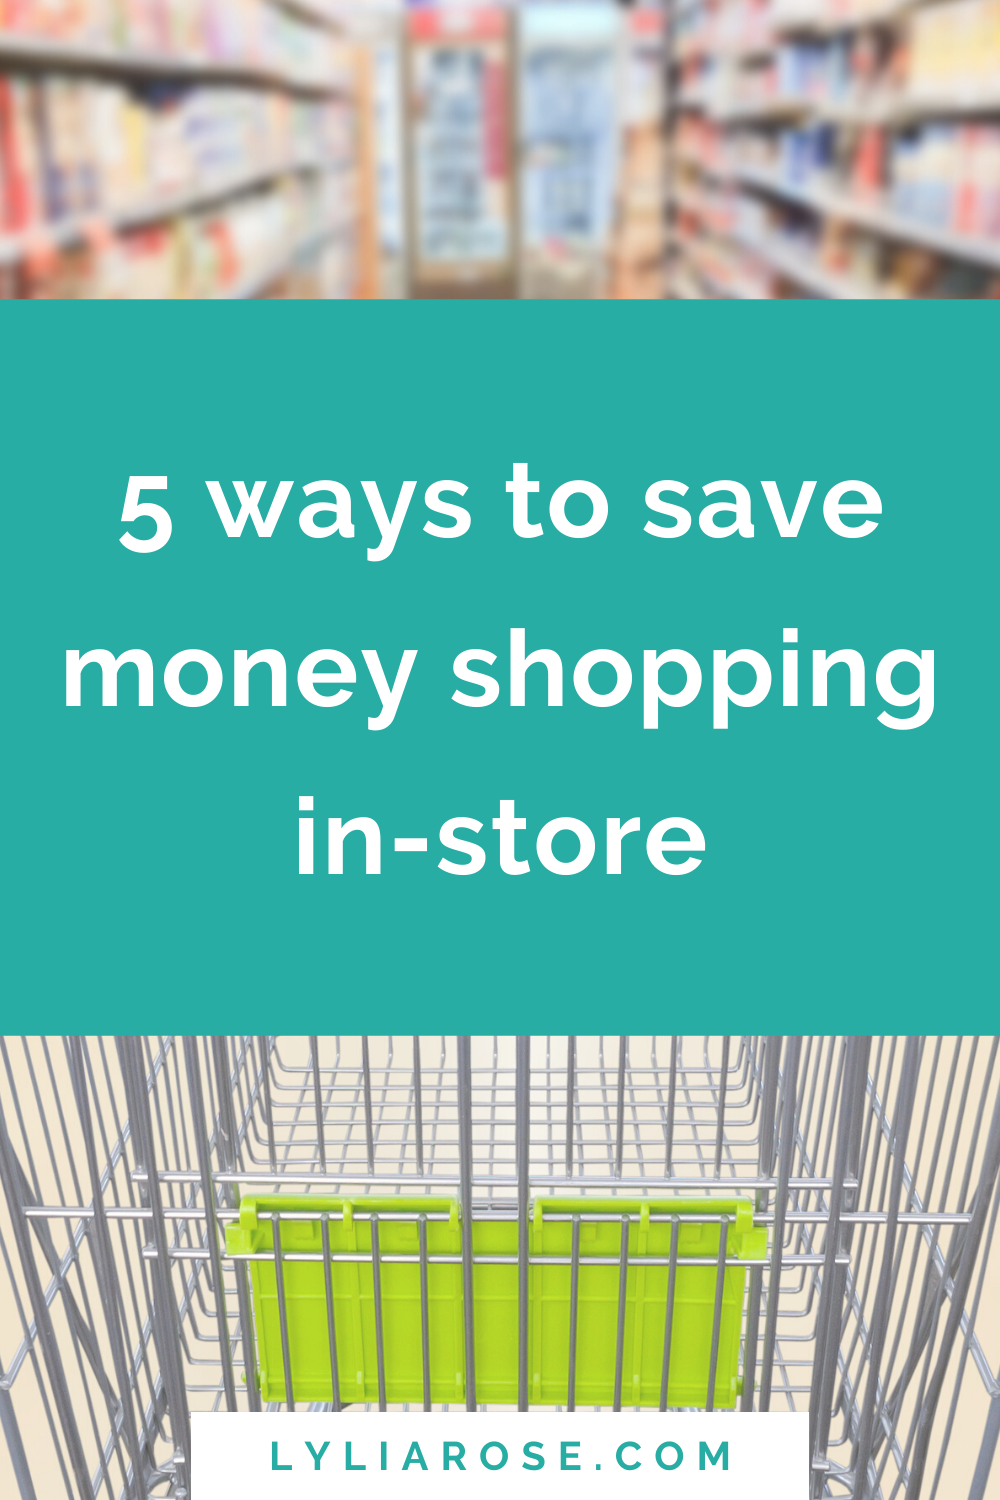 5 ways to save money shopping in-store